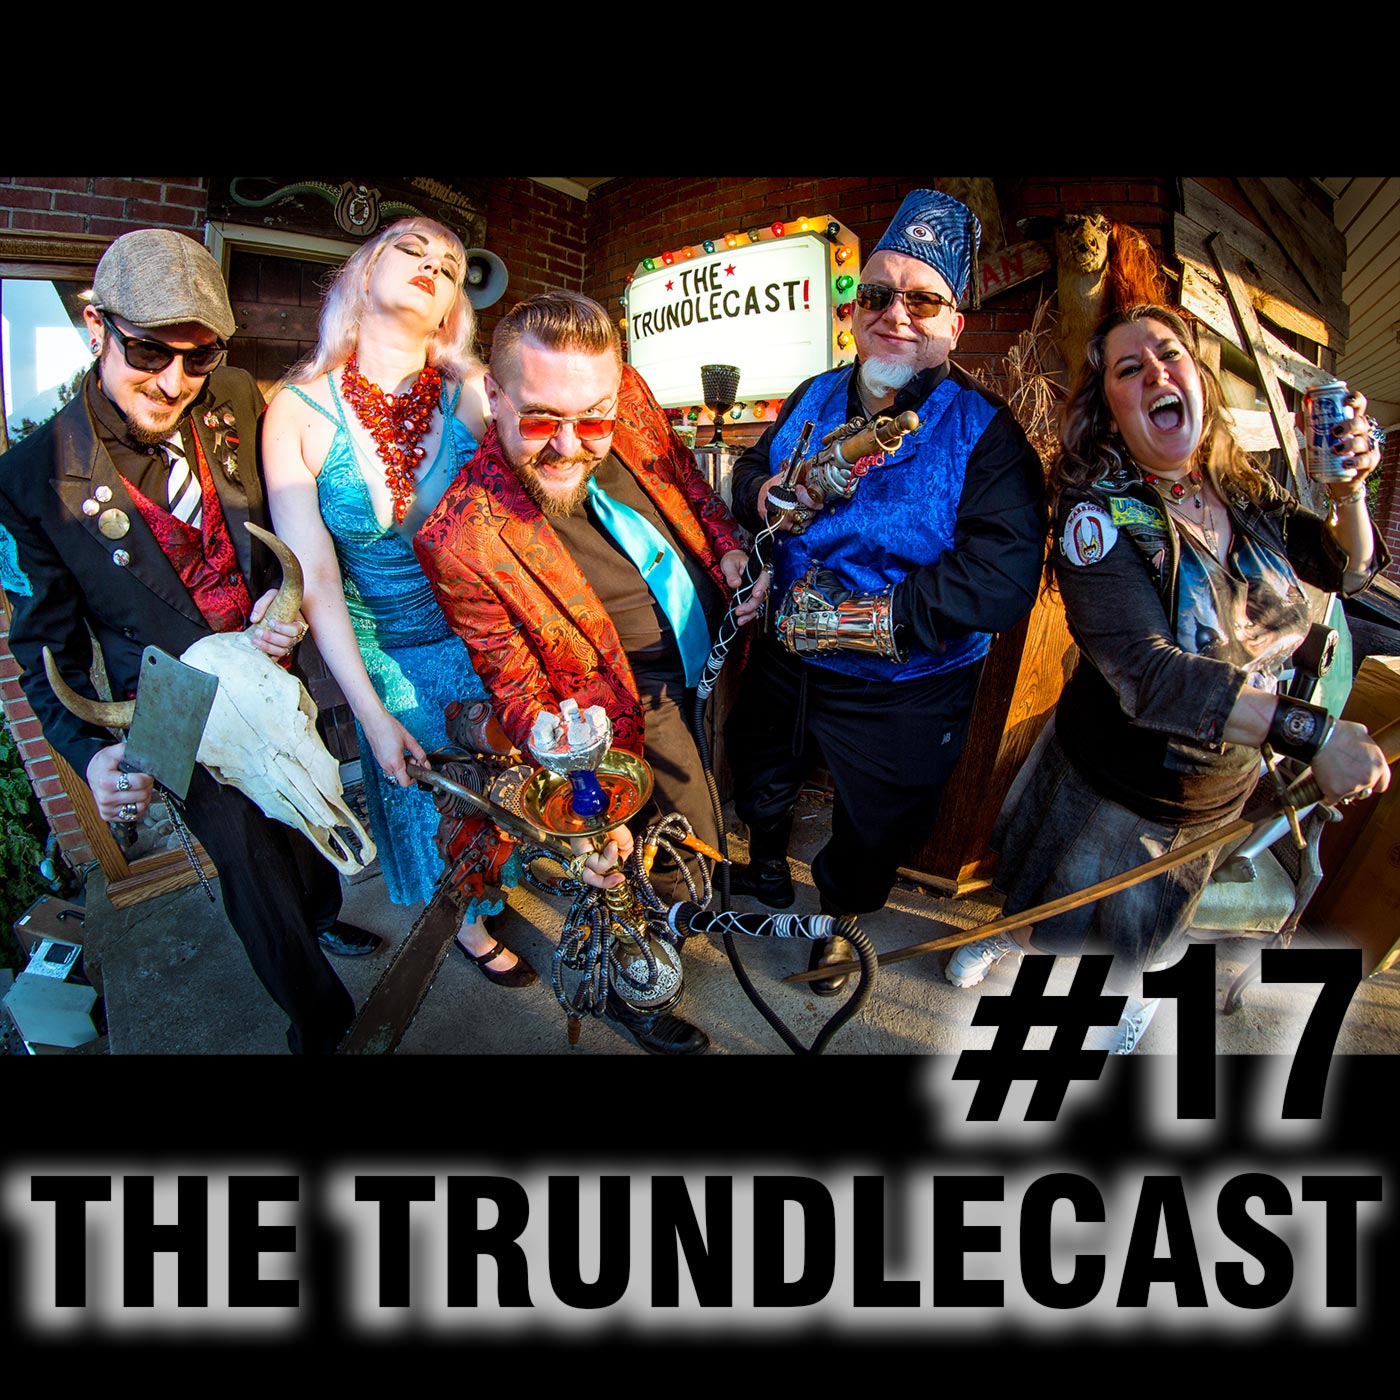 The 17th Trundlecast!